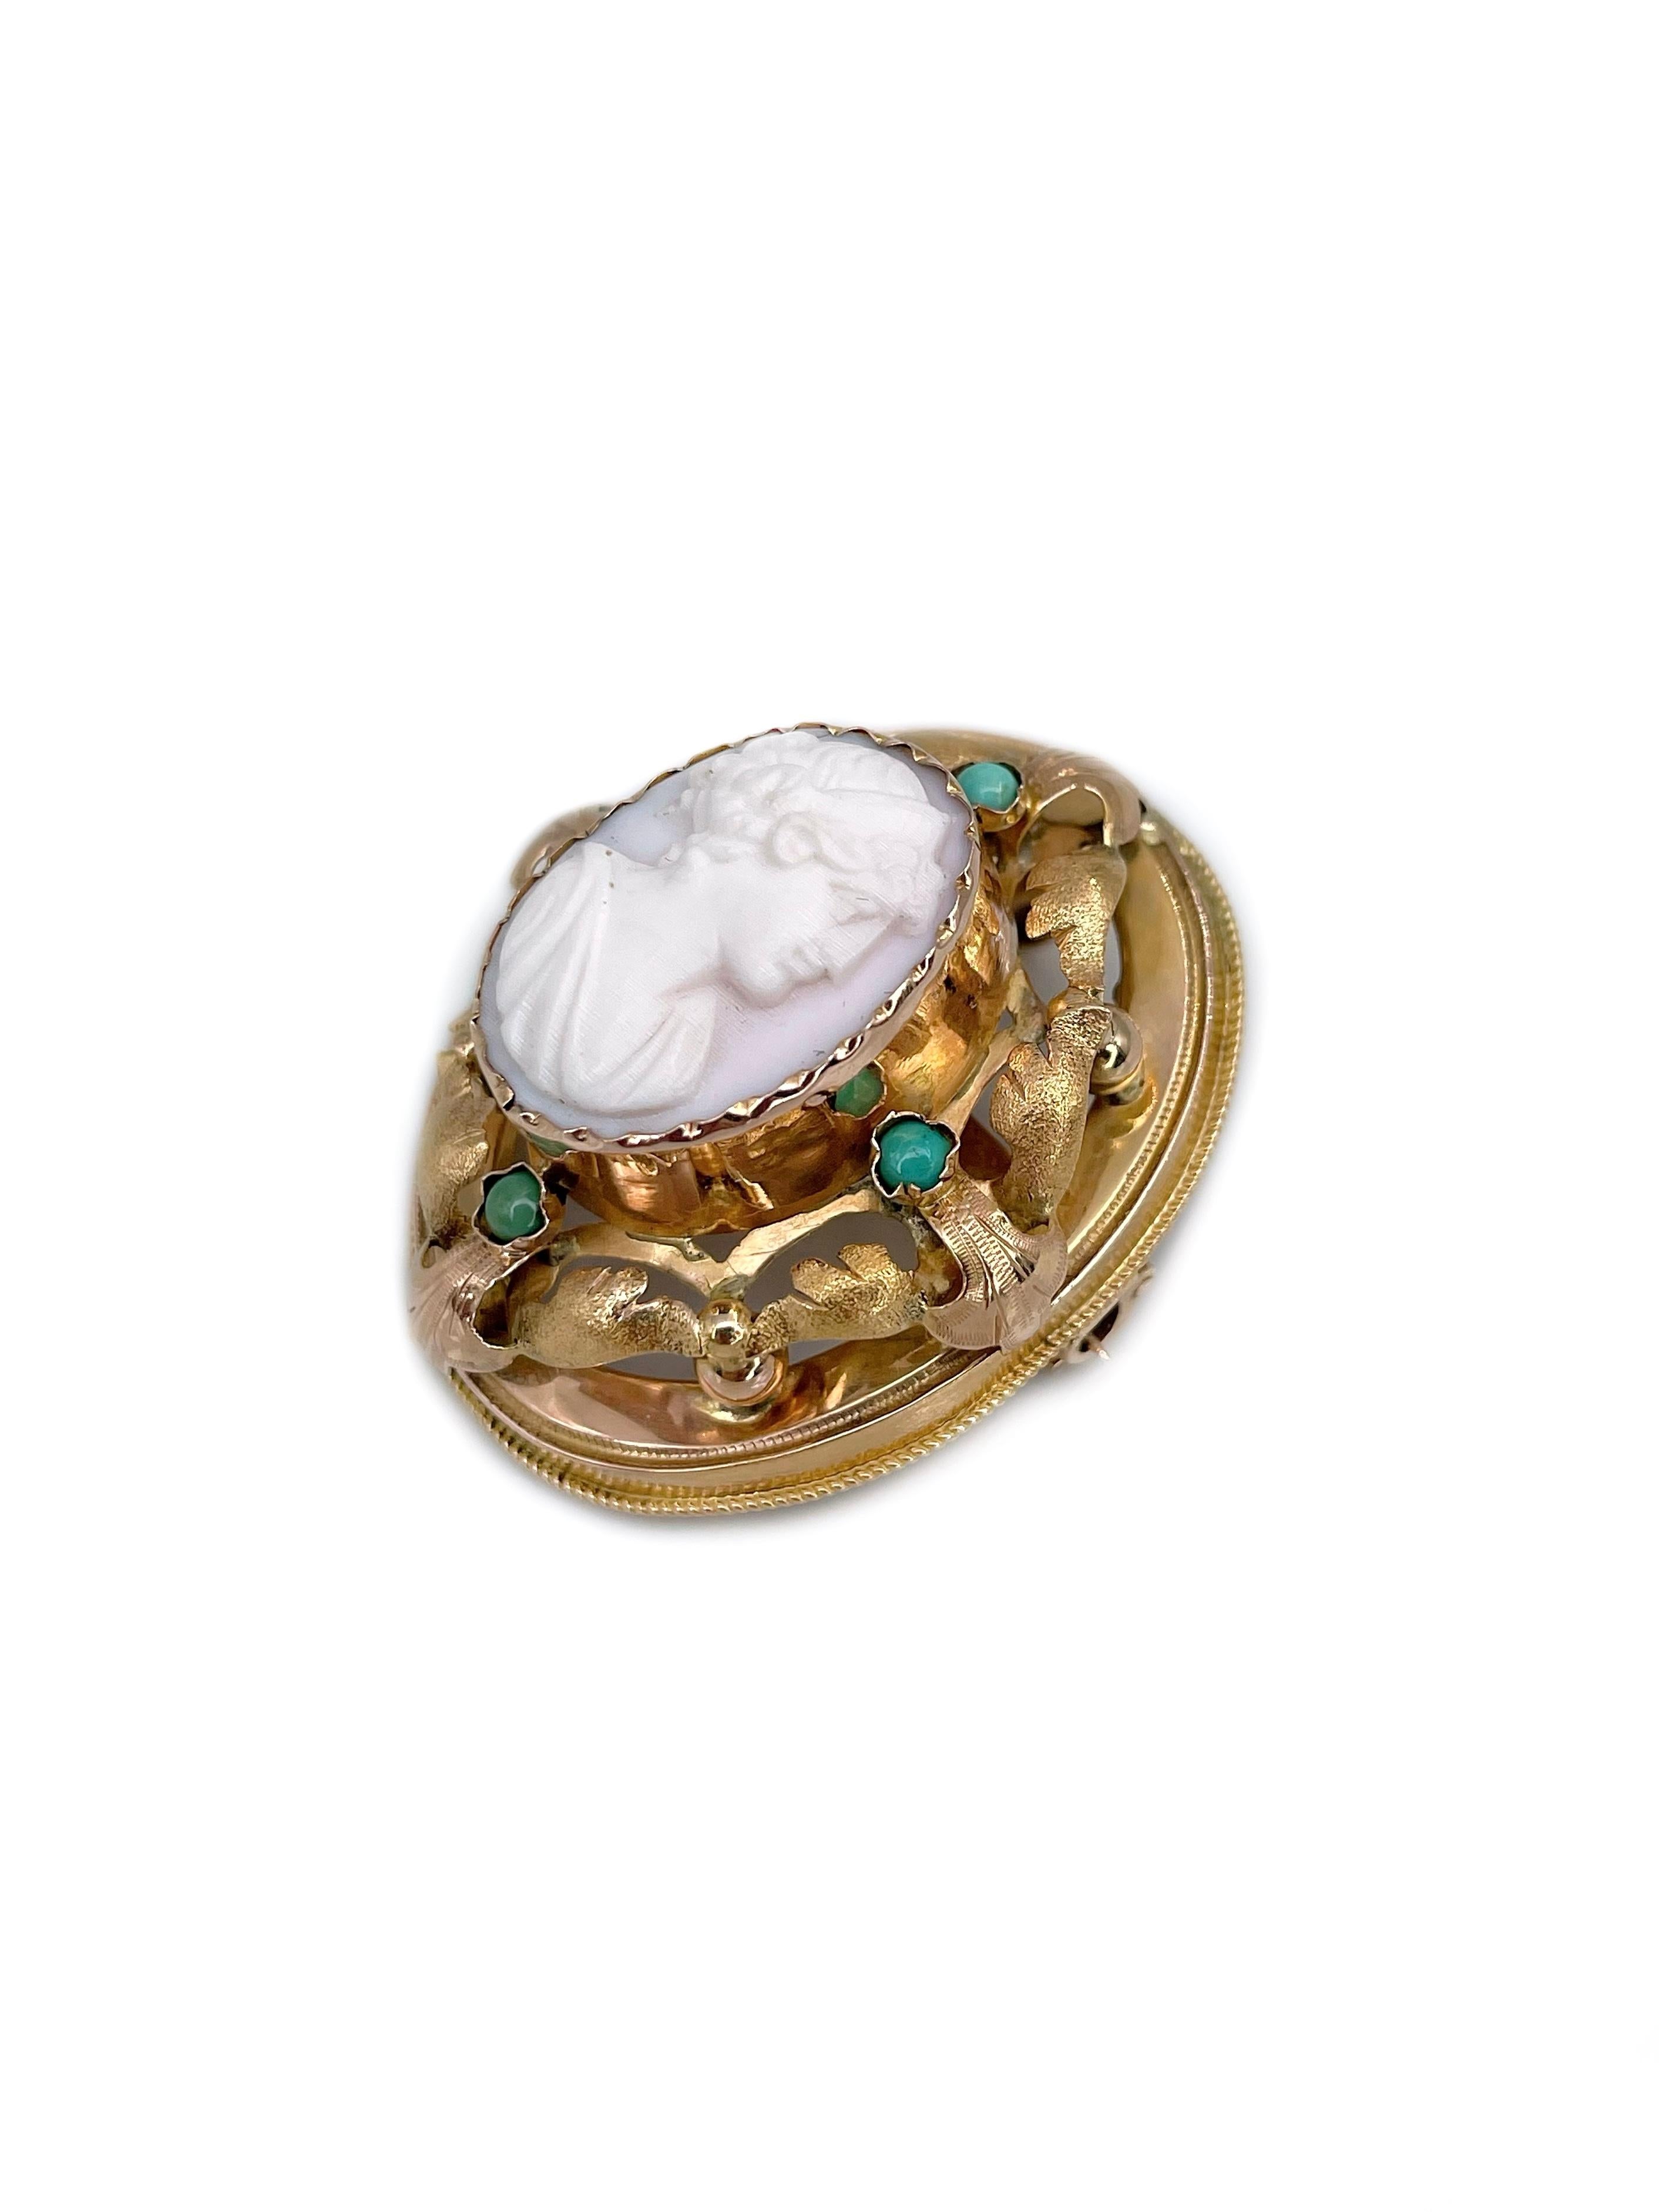 Cabochon Victorian 18 Karat Gold Lady Shell Cameo Turquoise Pendant Pin Brooch For Sale